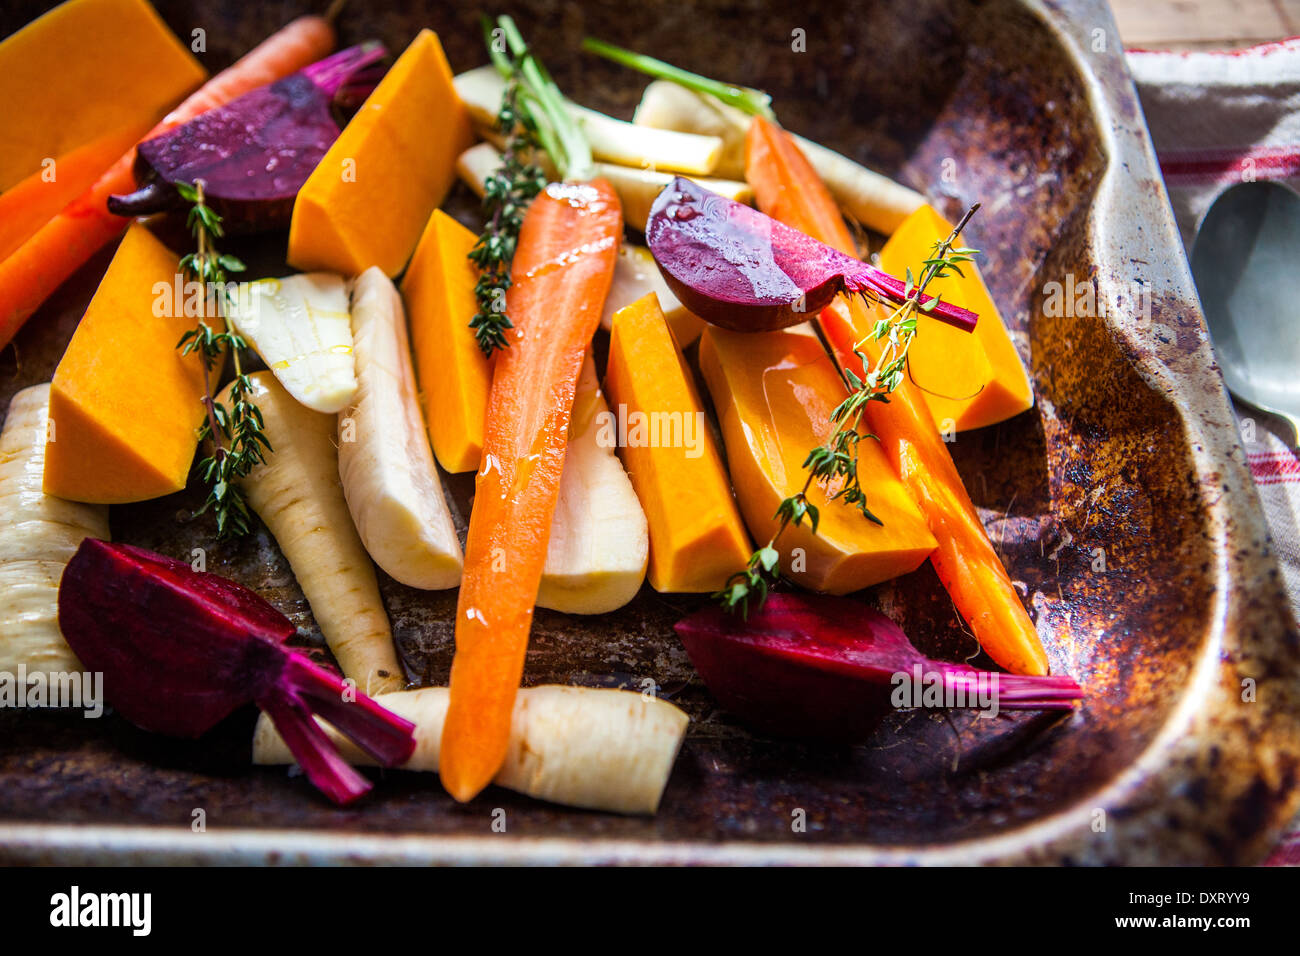 A tray of oven roasted vegetables Stock Photo